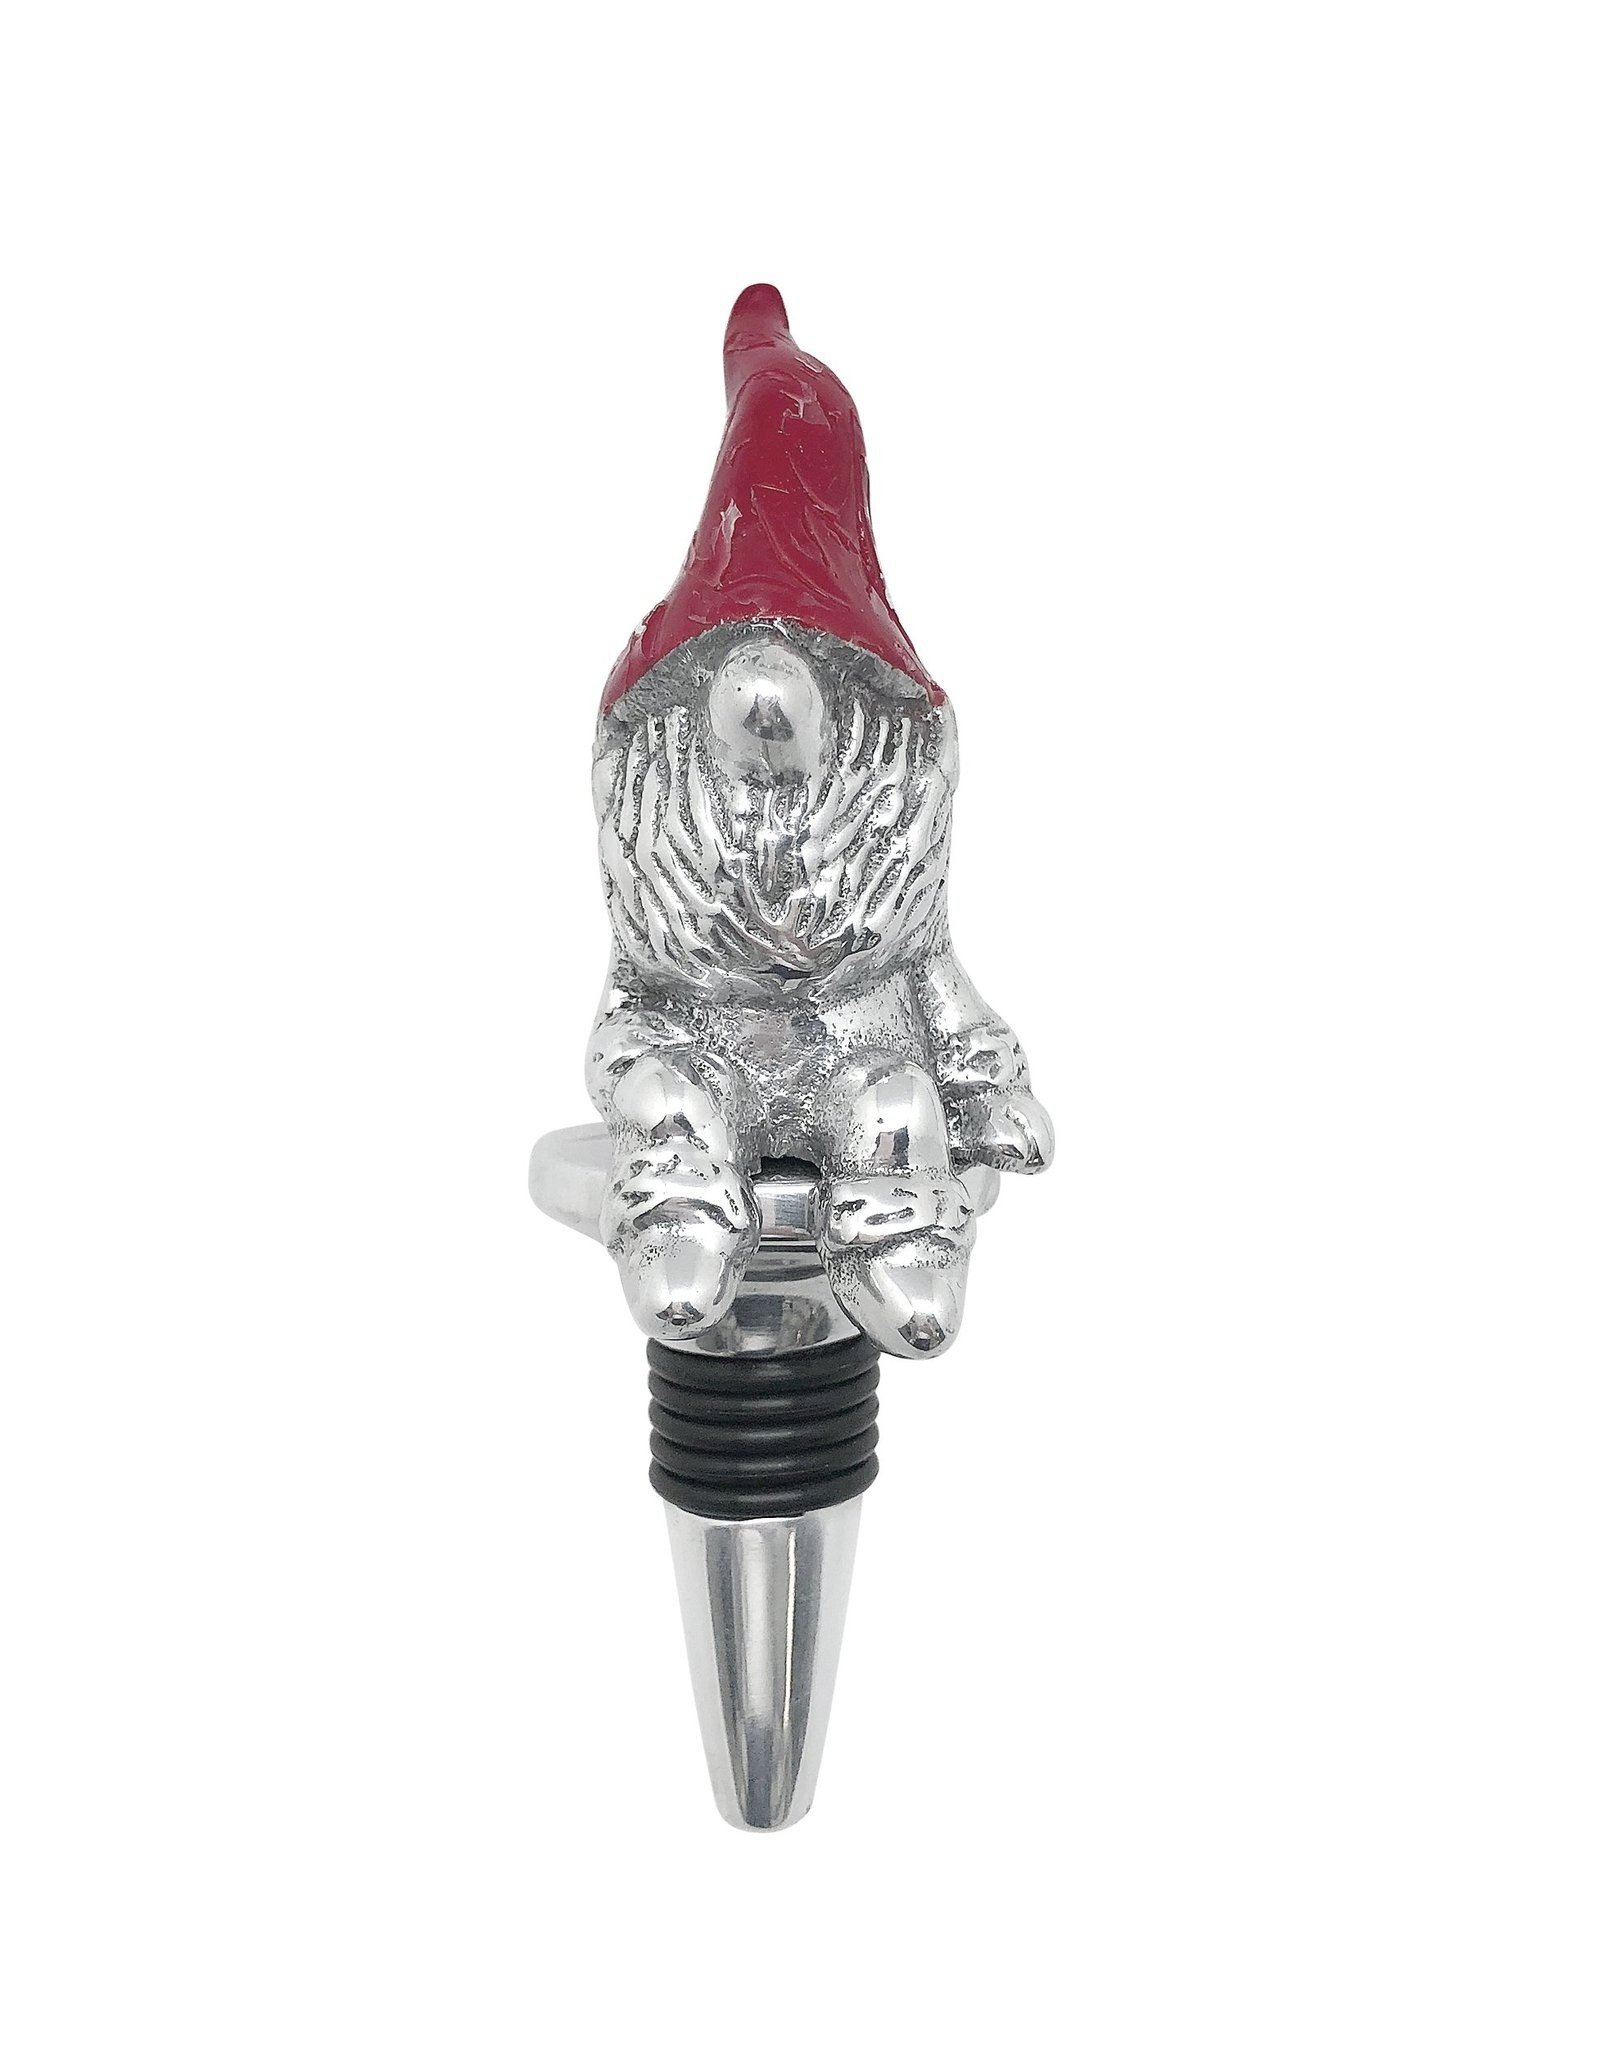 Mariposa Mariposa - Gnome with Red Hat Bottle Stopper